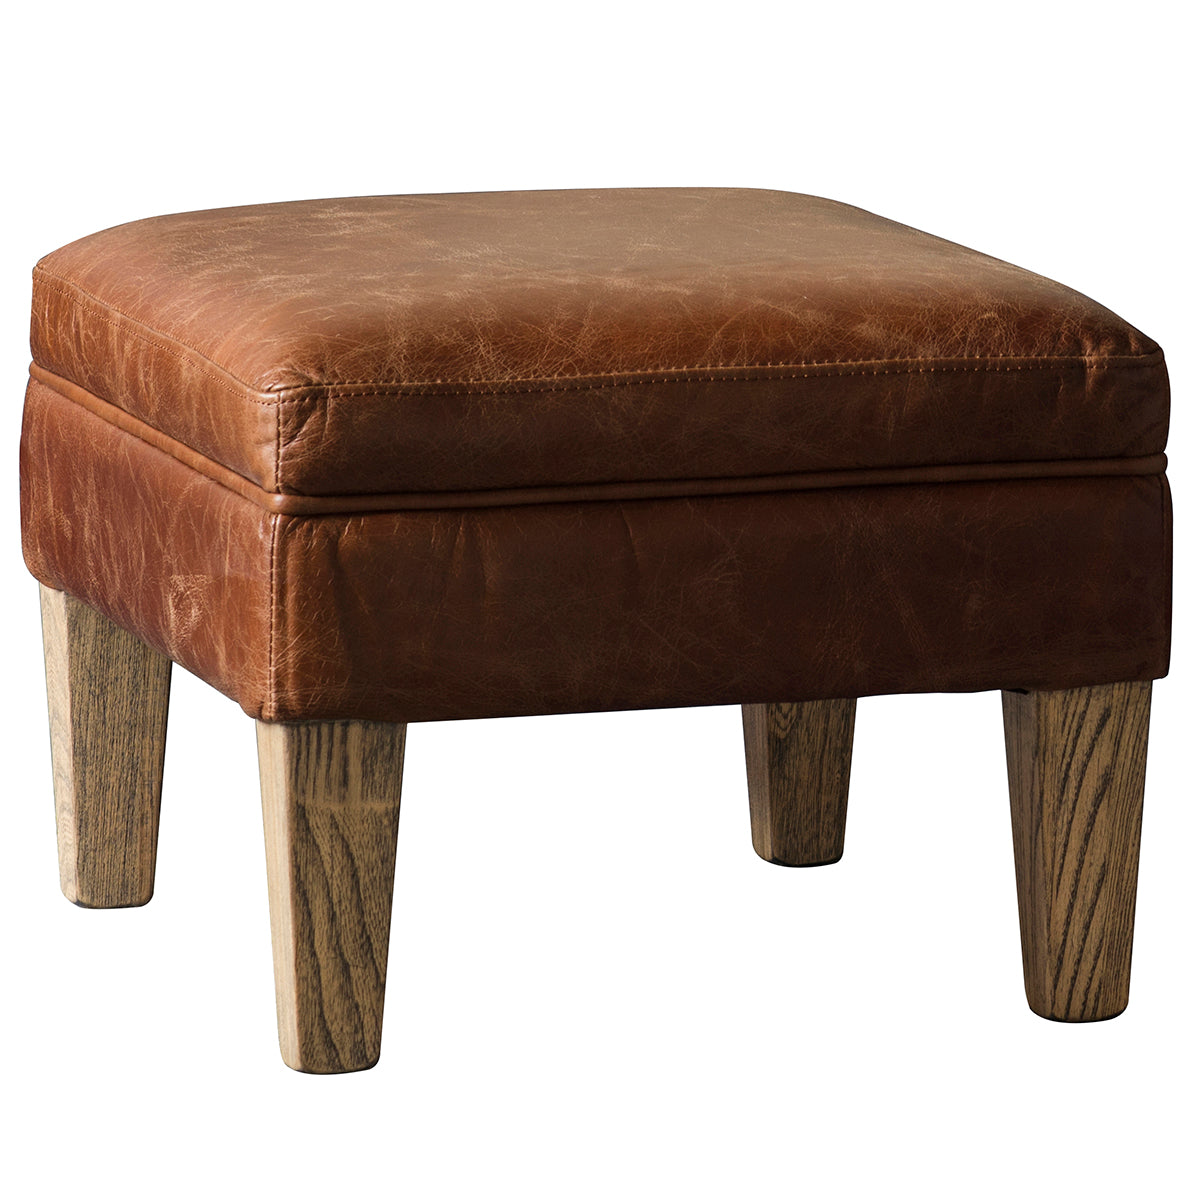 A vintage brown leather ottoman for home furniture and interior decor.